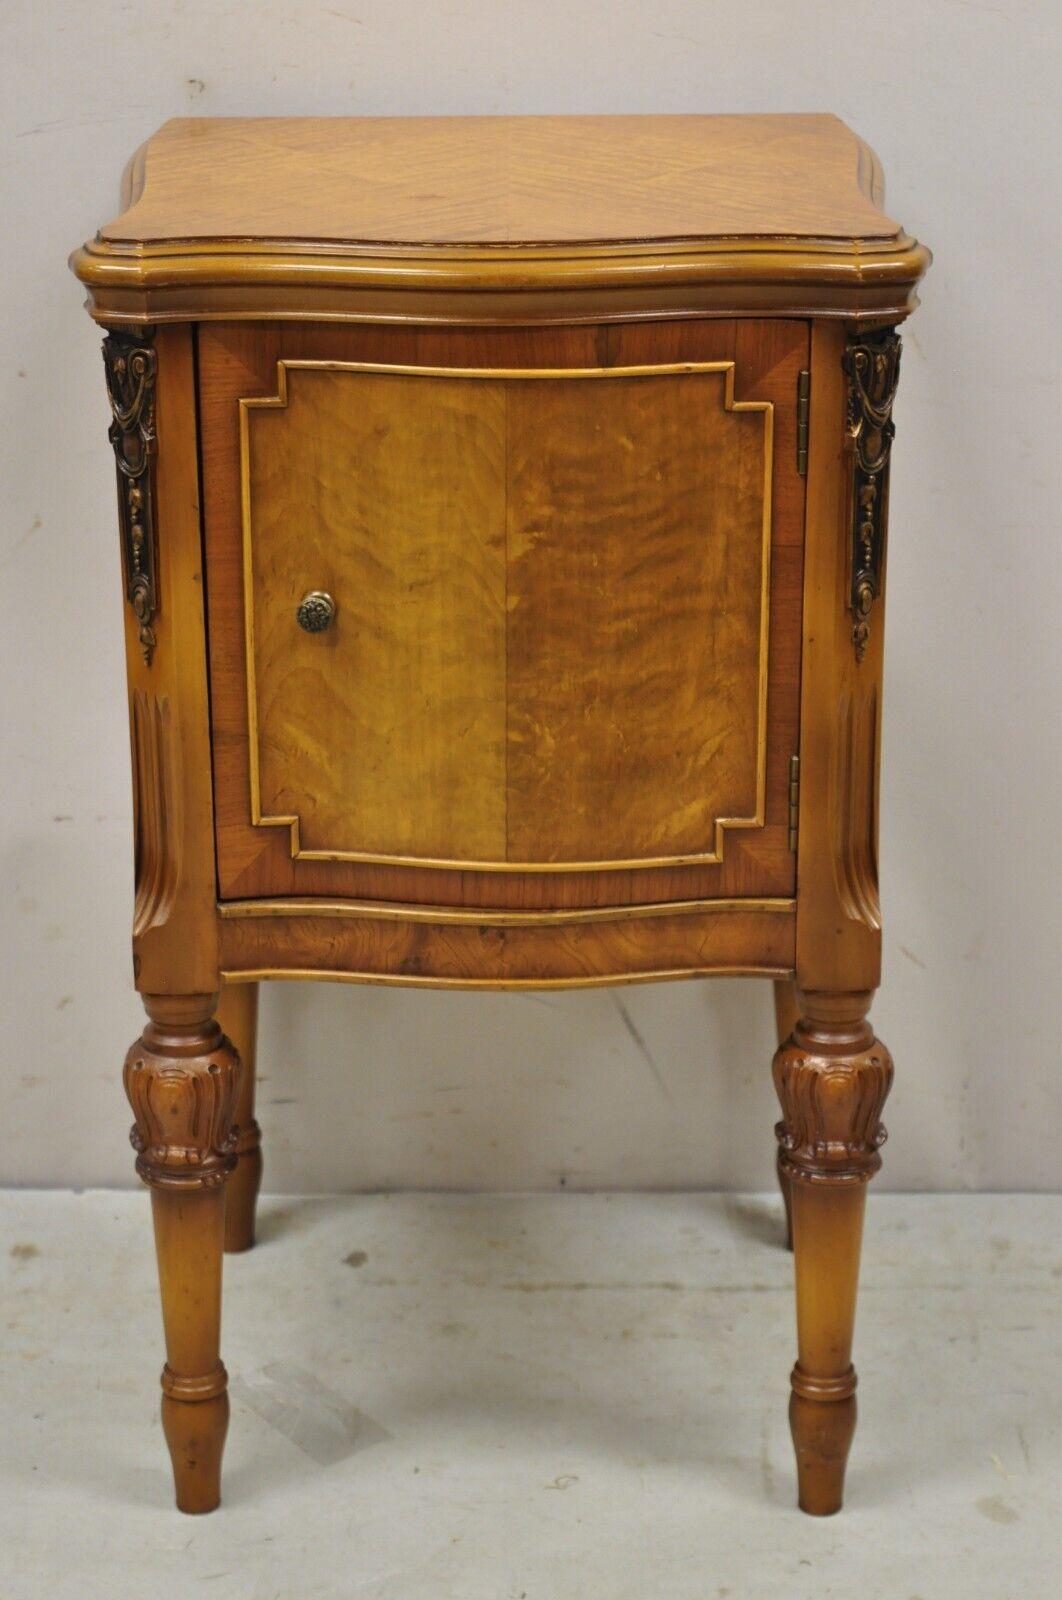 Antique French Louis XV Style satinwood one door nightstand bedside cabinet by Joerns. Item features beautiful wood grain, 1 swing door, tapered legs, very nice antique item, quality American craftsmanship, great style and form, circa Early to